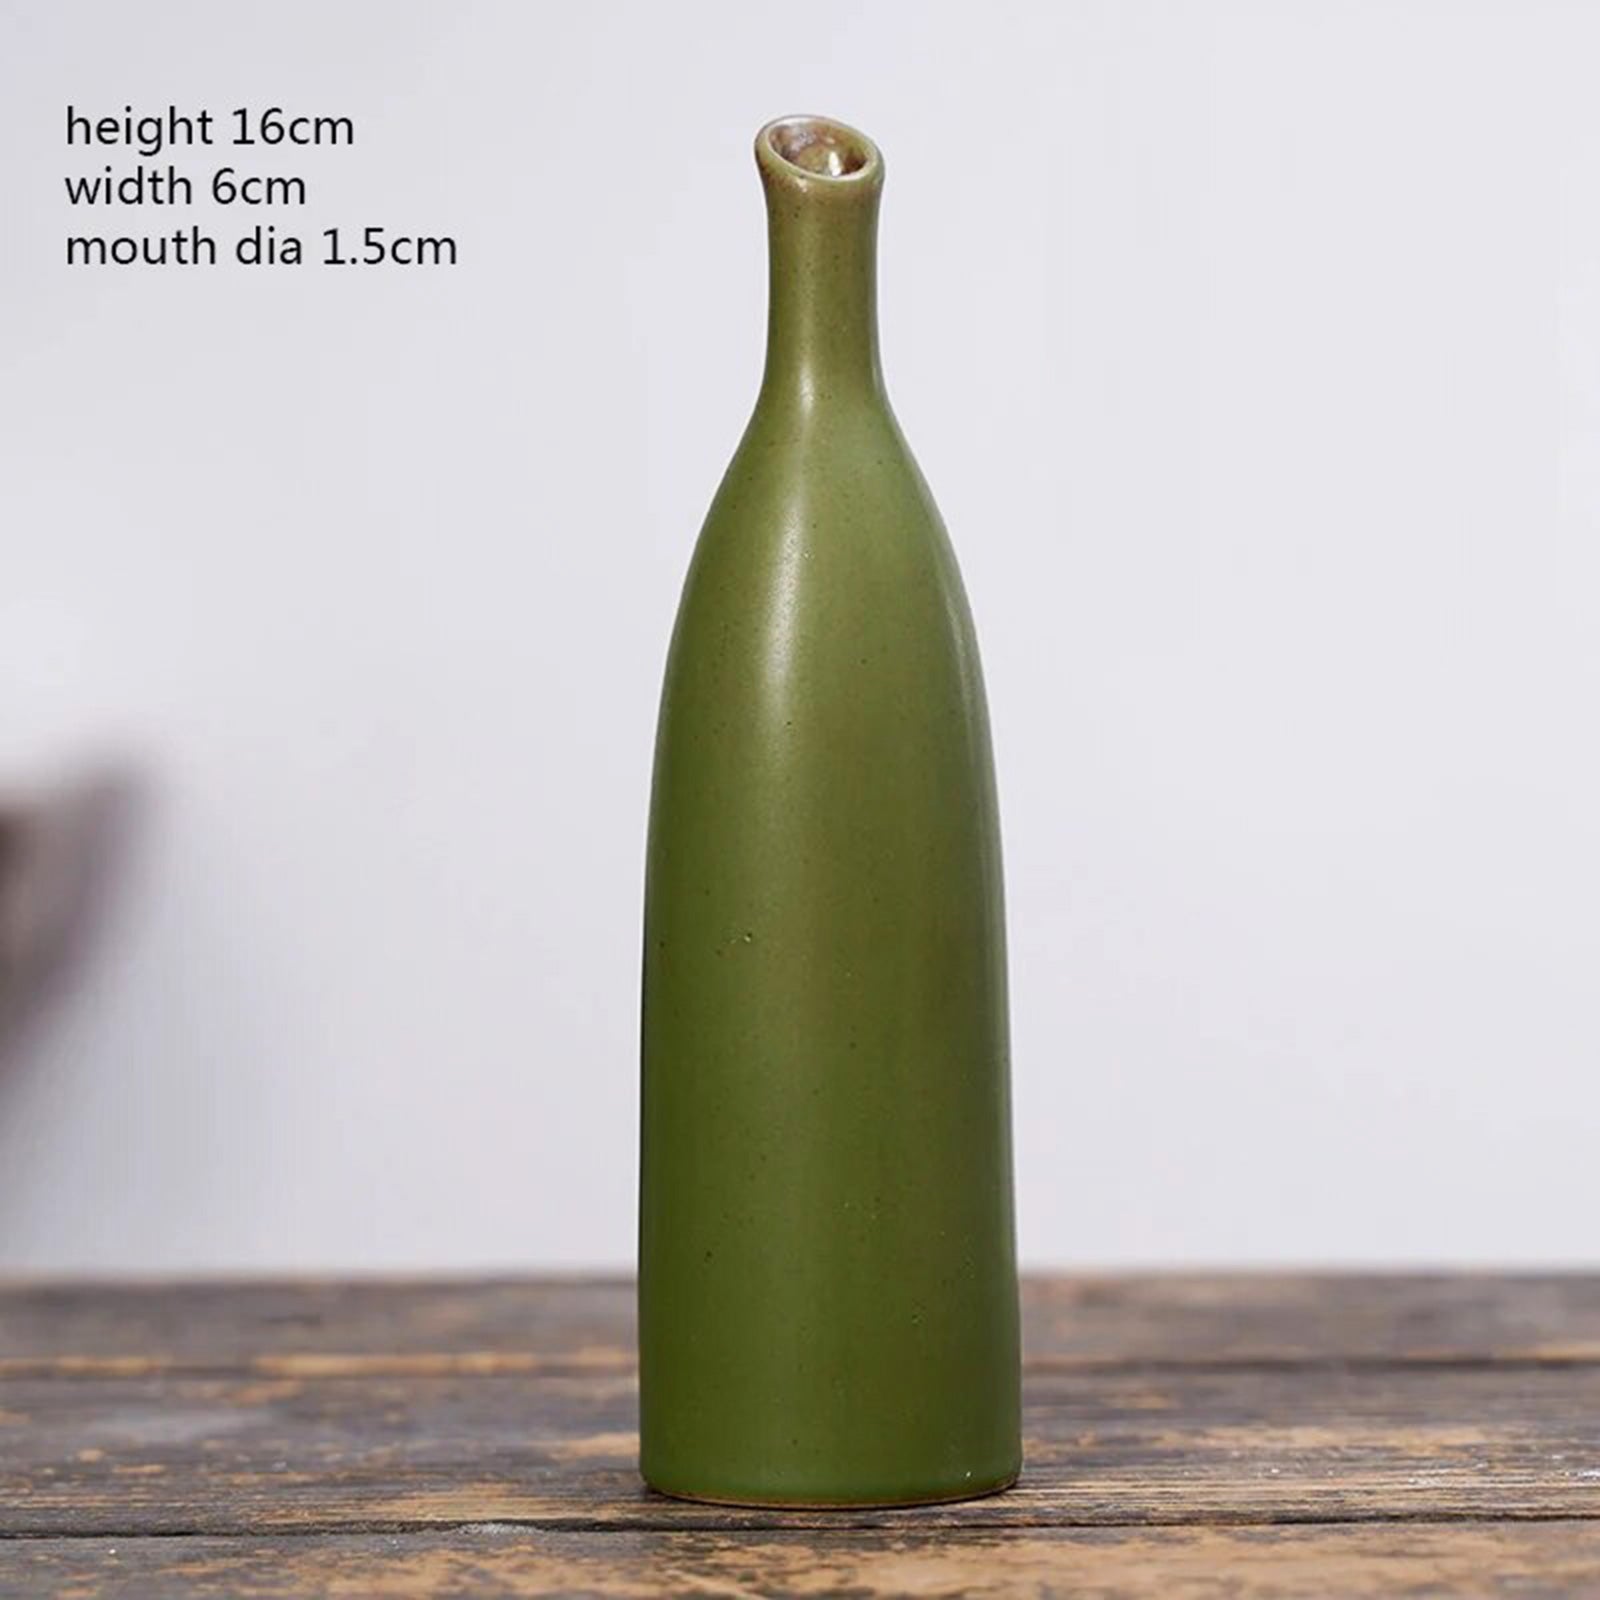 Vintage Greens: A Collection of 9 Charming Vases